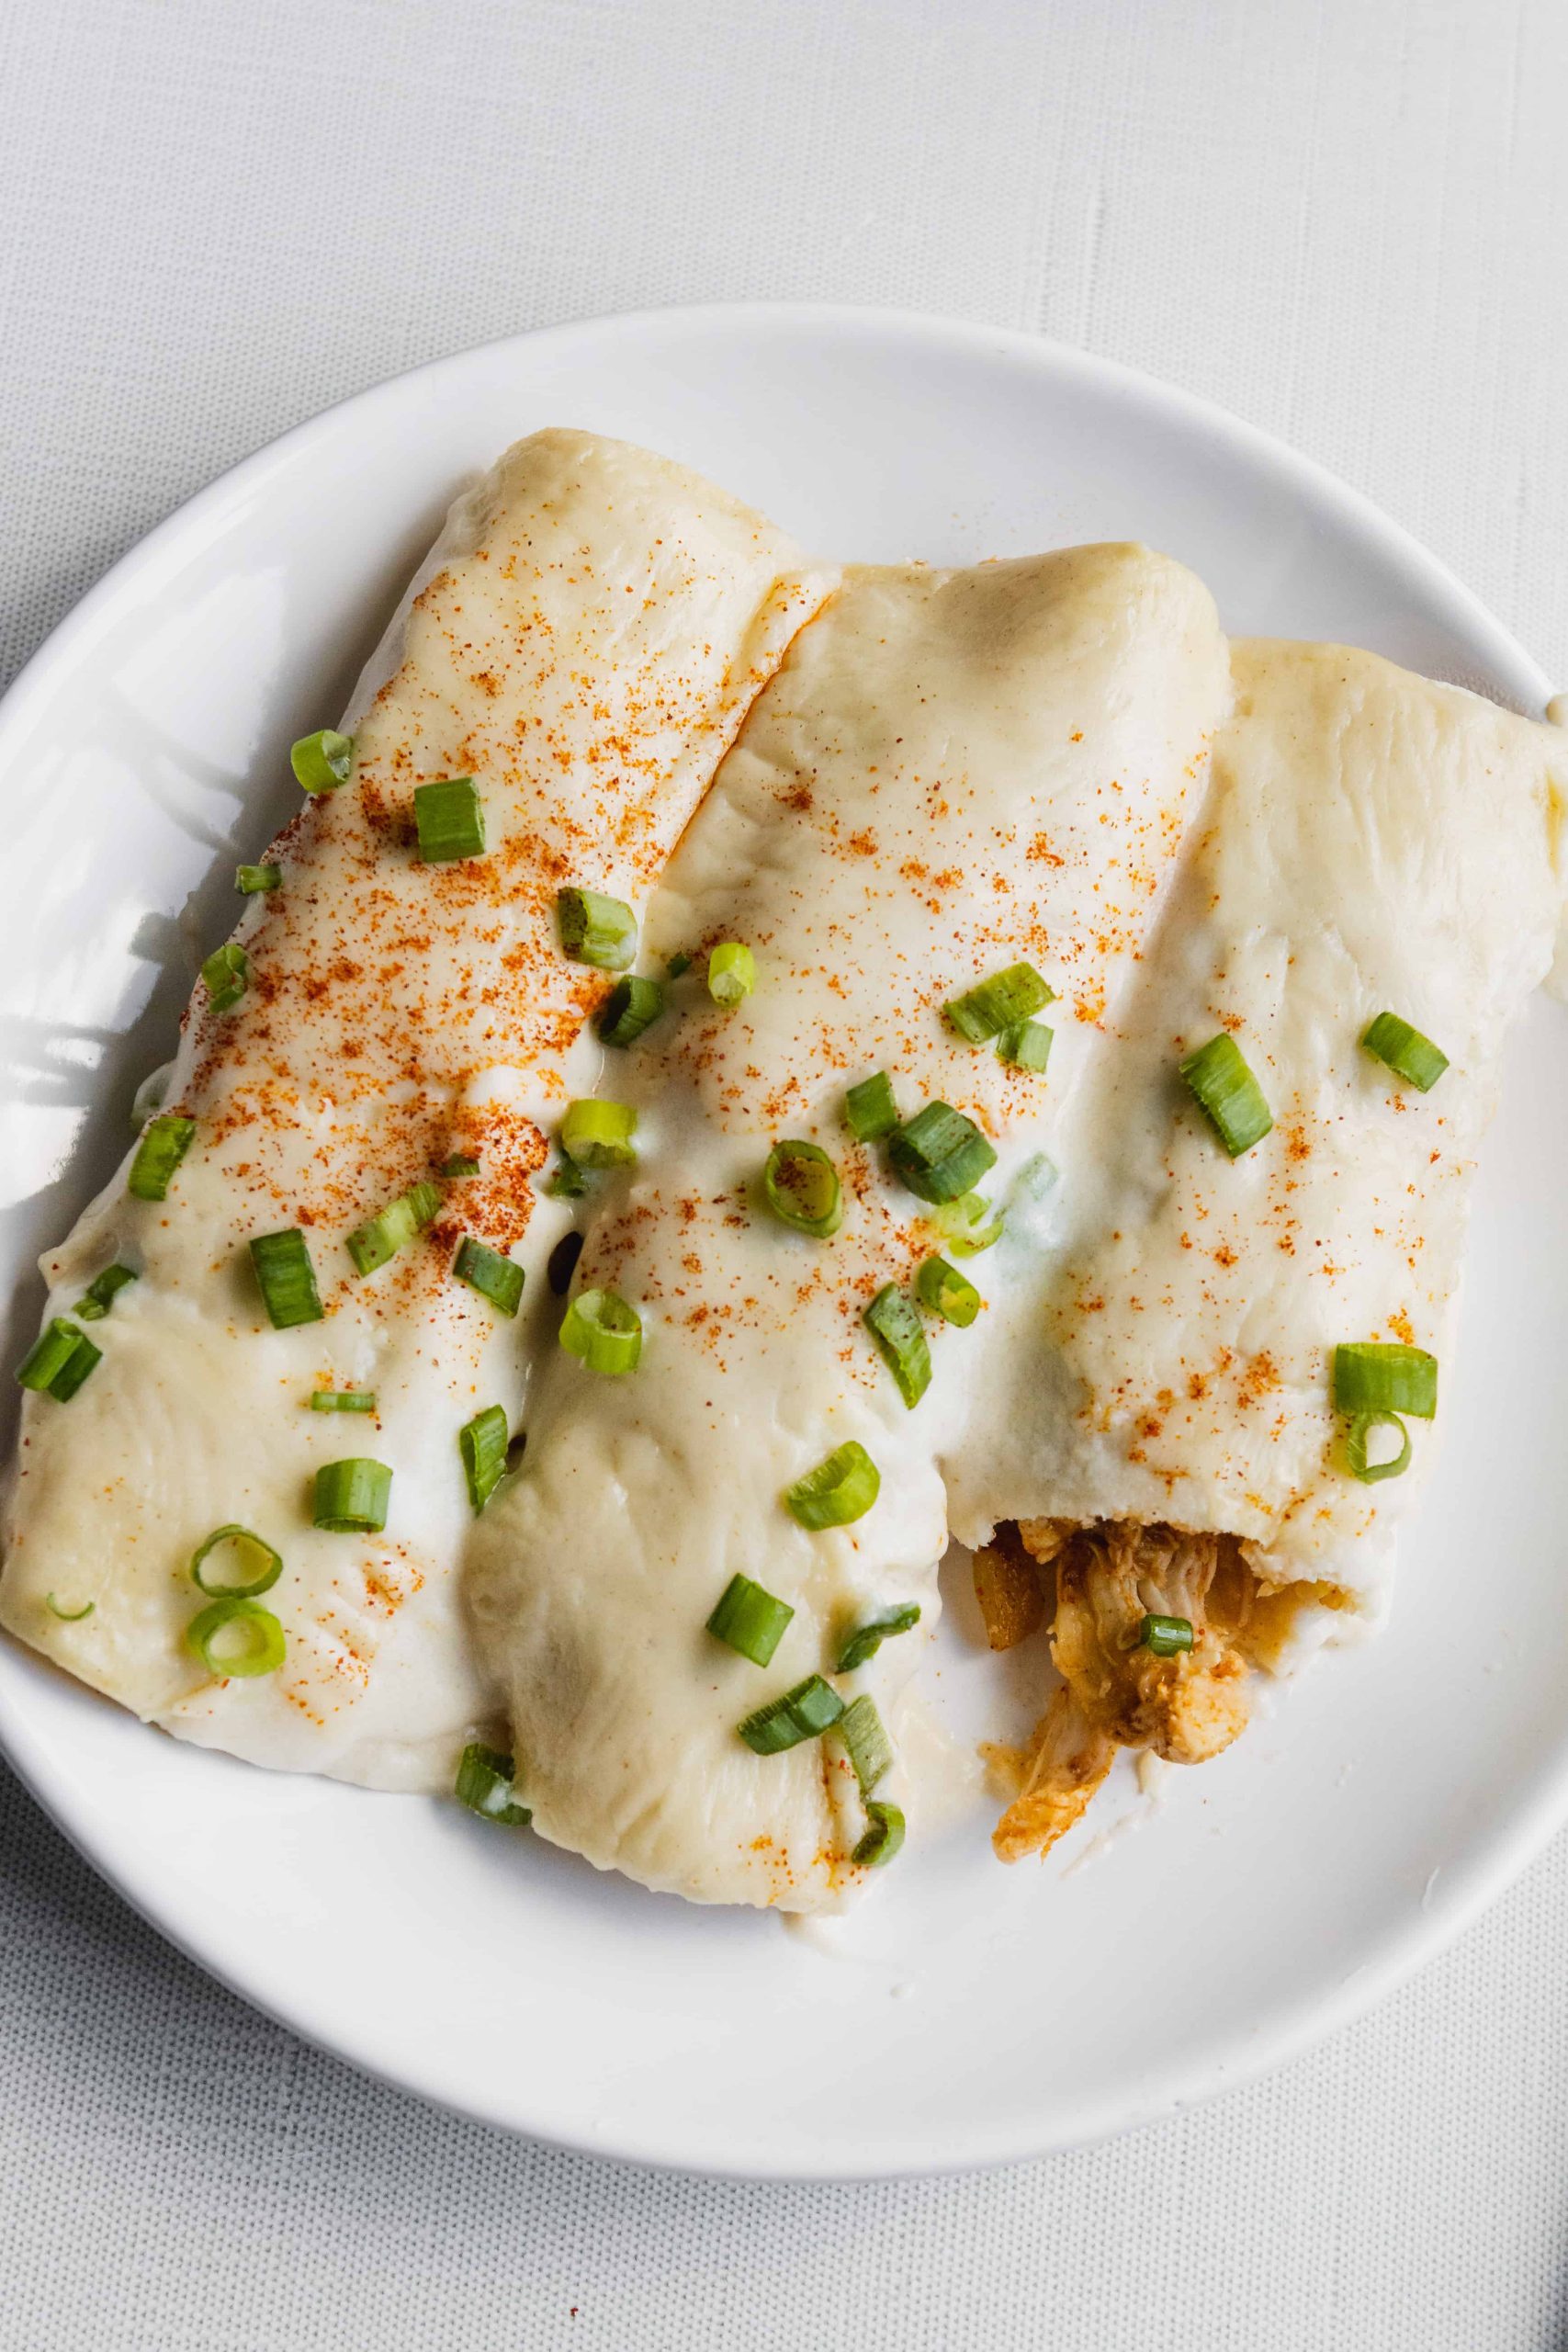 Chicken Enchiladas with sour cream sauce and green onions on top